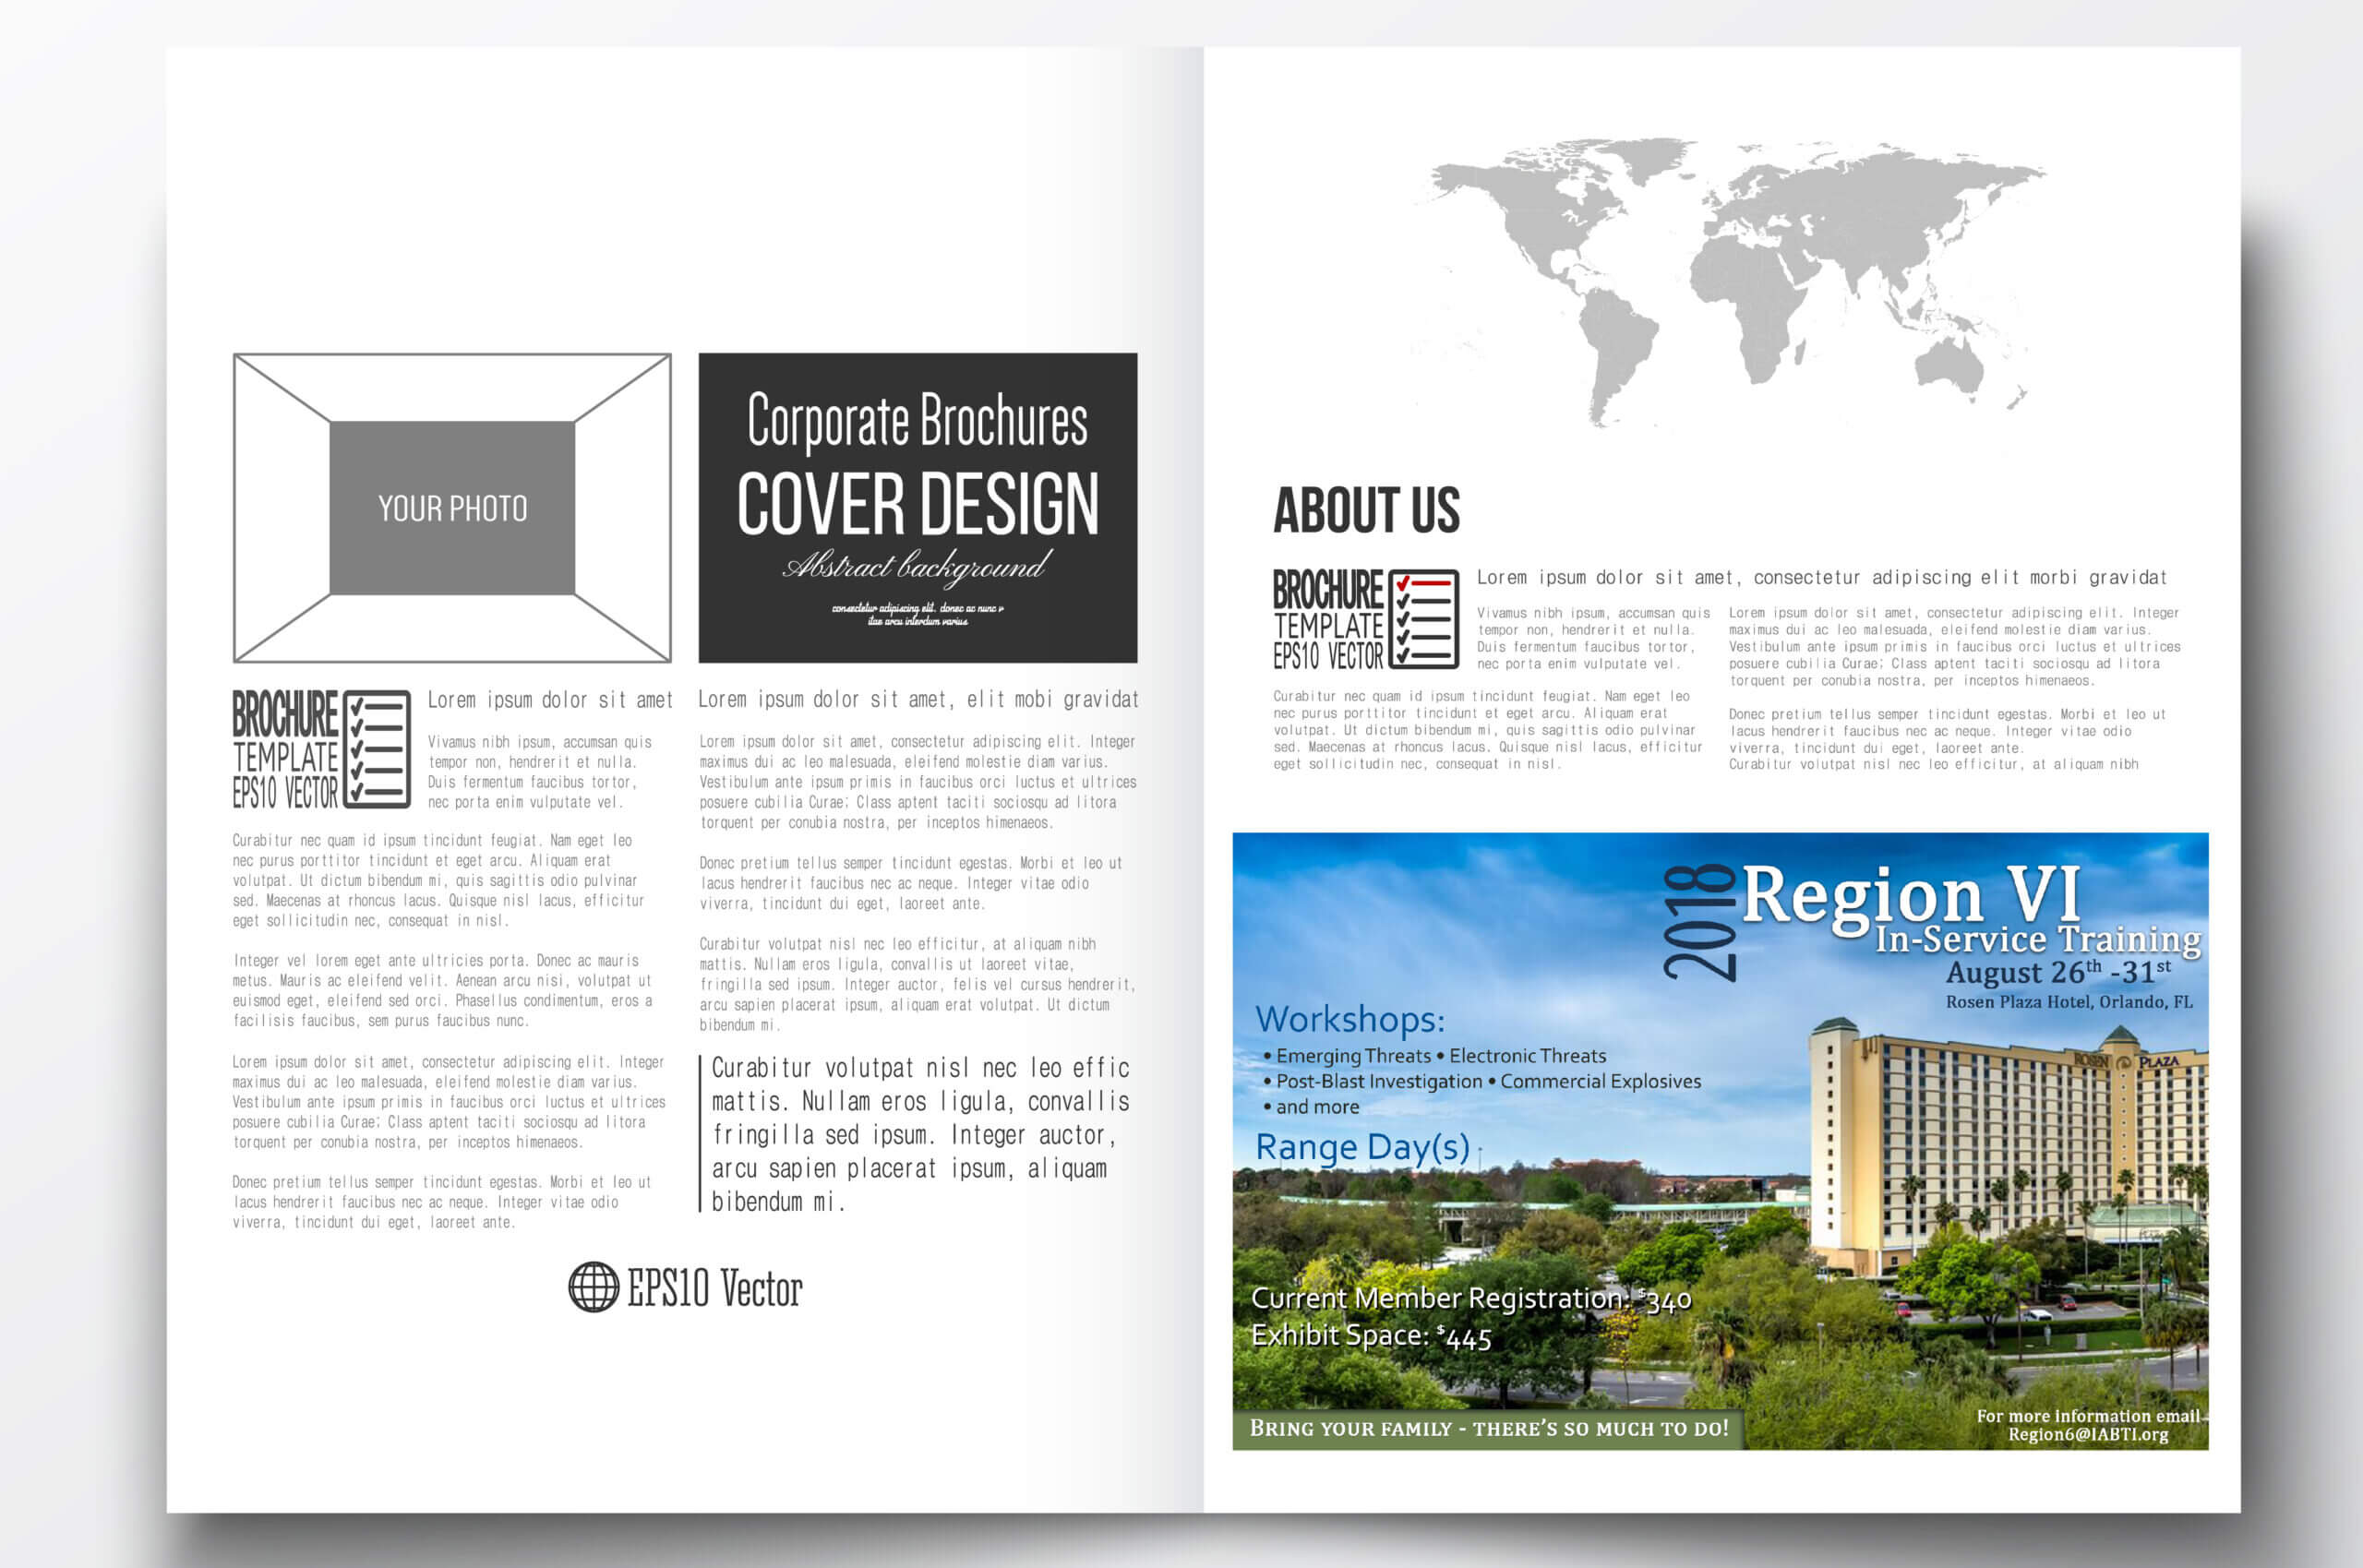 027 Half Page Template Ideas Regioni6Ad Stupendous Ad Free Intended For Magazine Ad Template Word